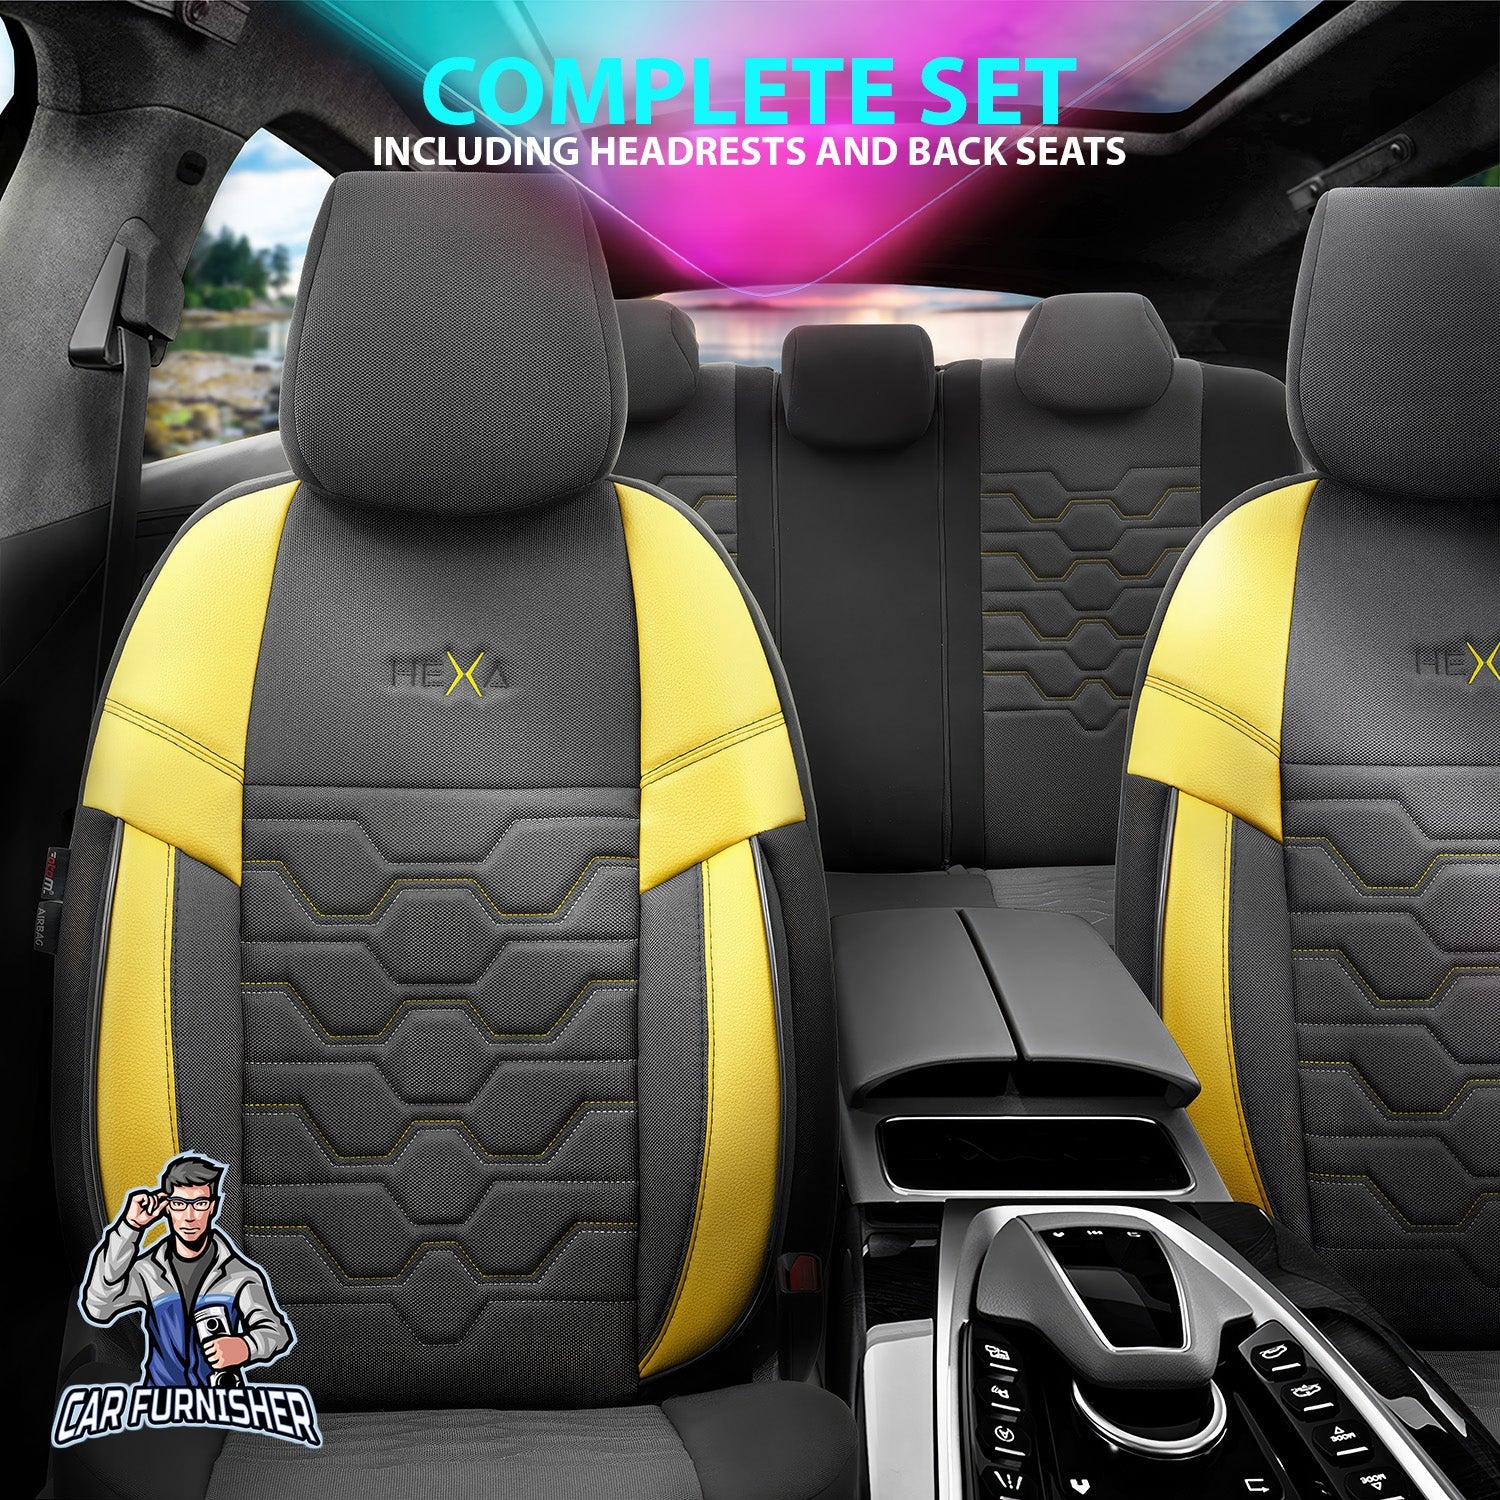 Mercedes 190 Seat Covers Hexa Design Yellow 5 Seats + Headrests (Full Set) Leather & Jacquard Fabric